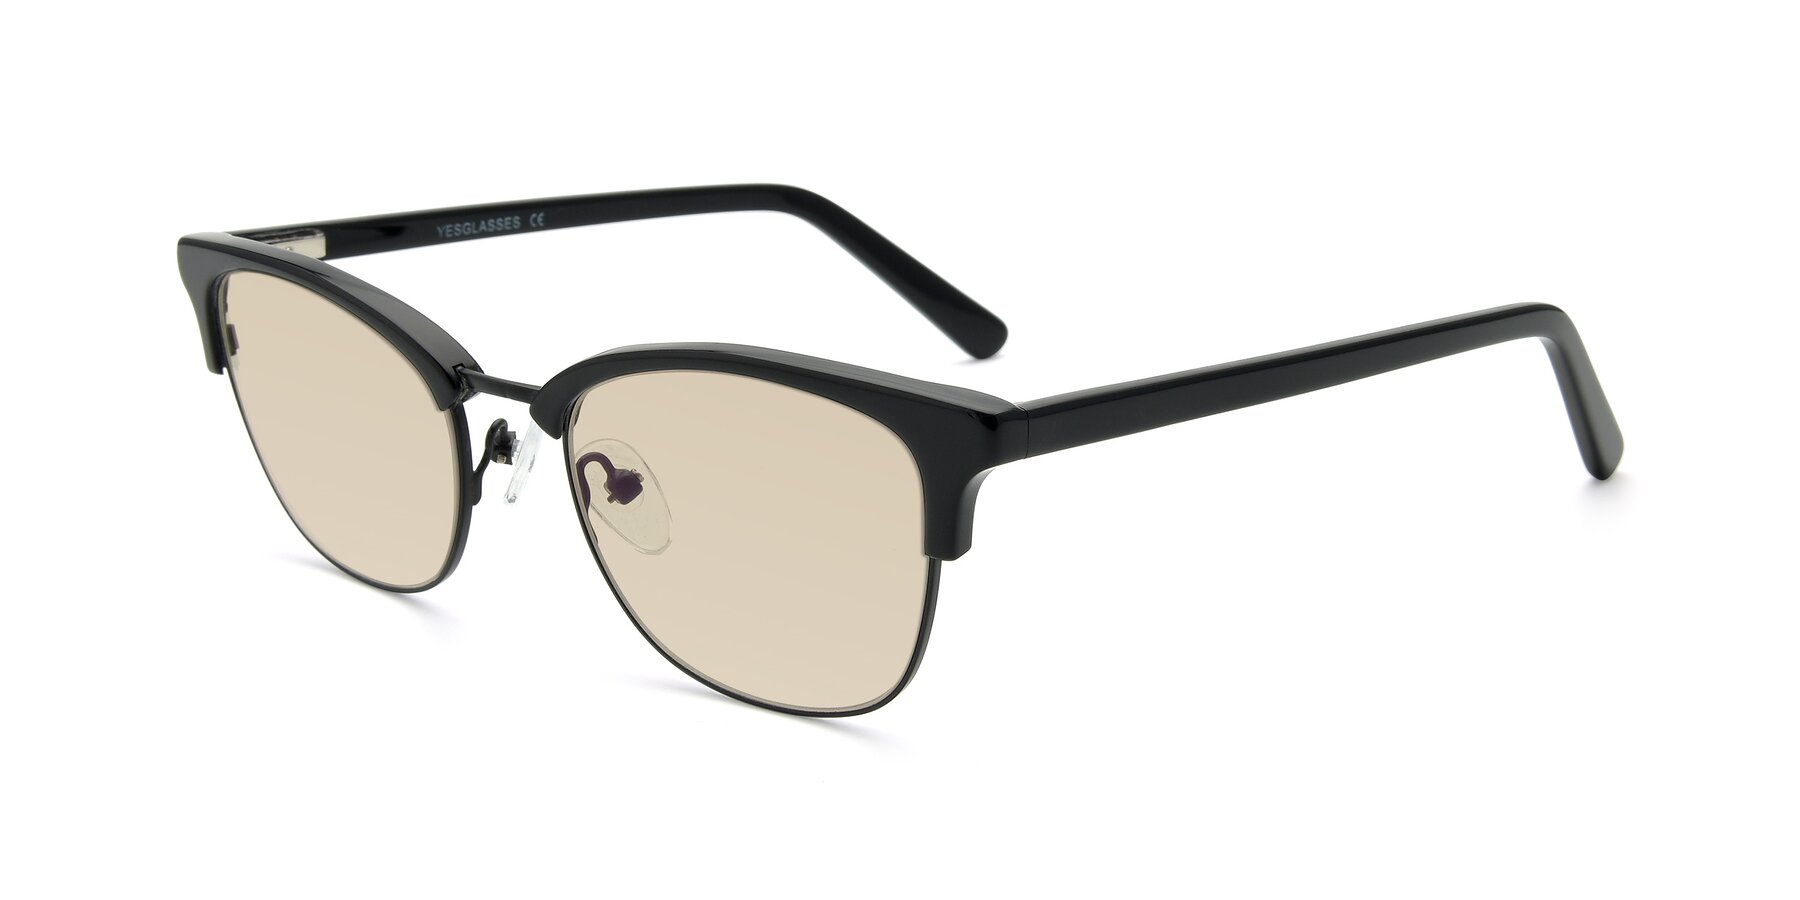 Angle of 17463 in Black with Light Brown Tinted Lenses